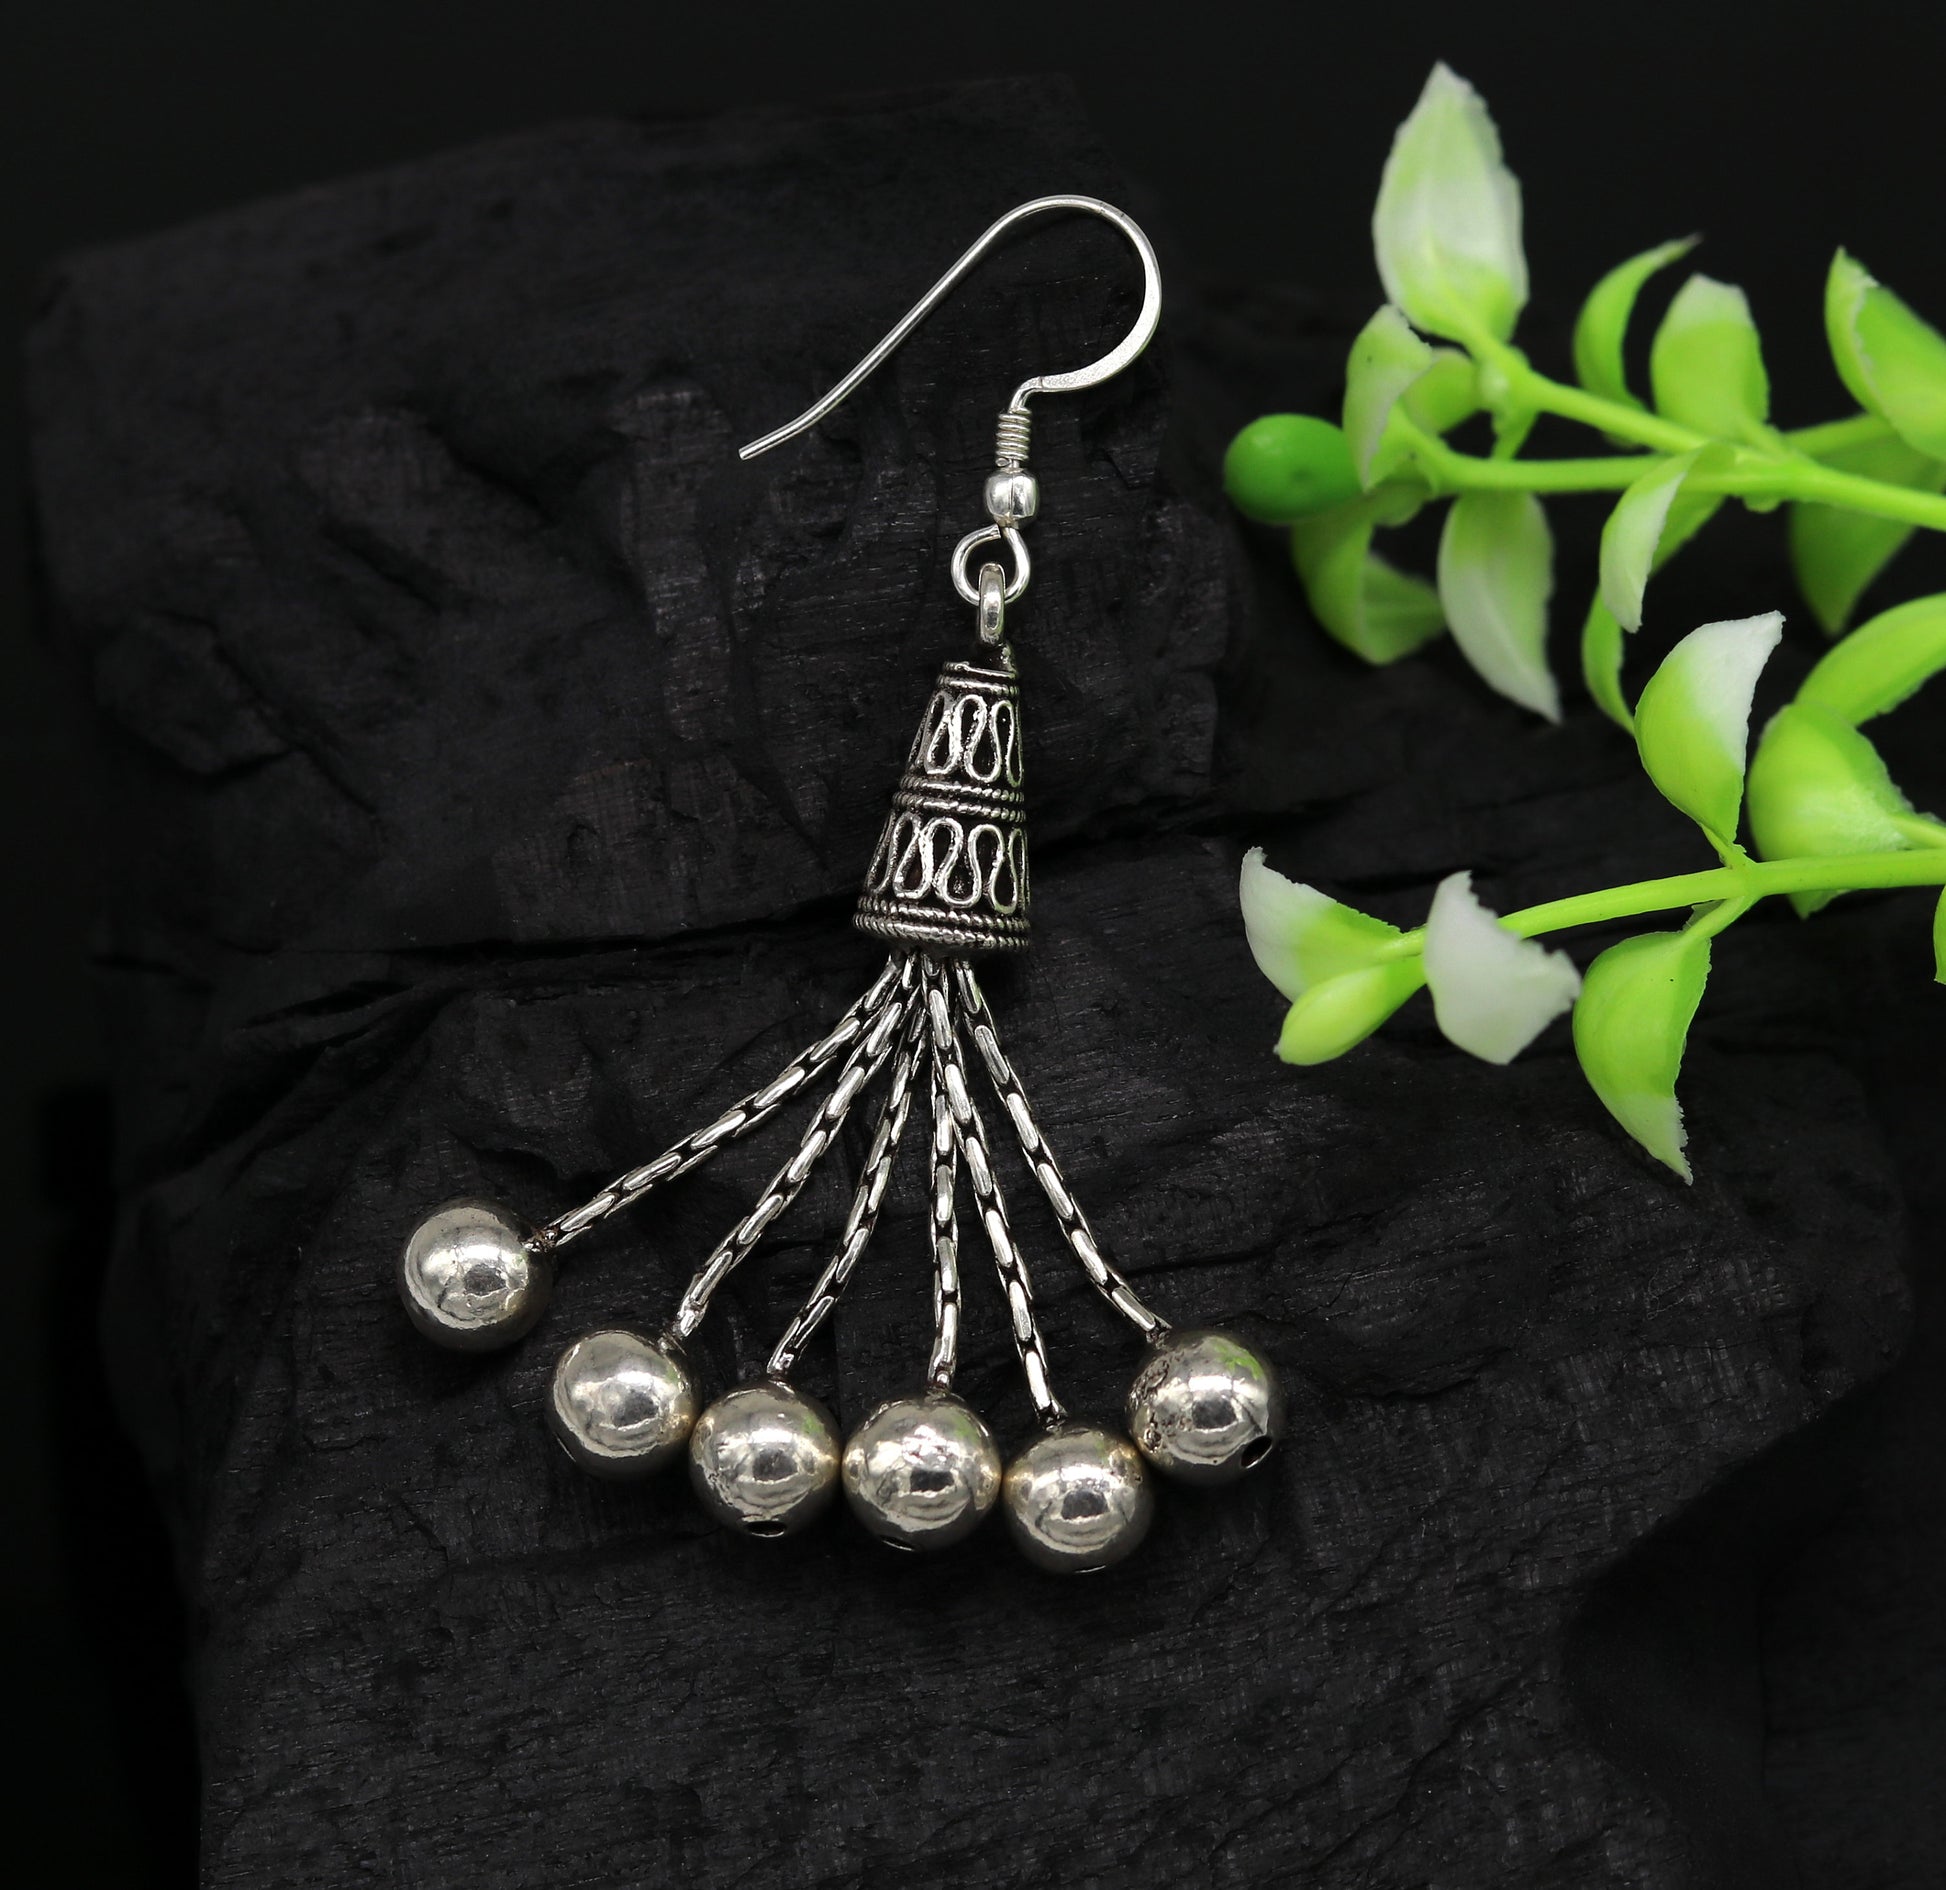 925 sterling silver handmade Fabulous customized design hoops earring with gorgeous hanging charm earring bridesmaid gifting jewelry ear1 - TRIBAL ORNAMENTS